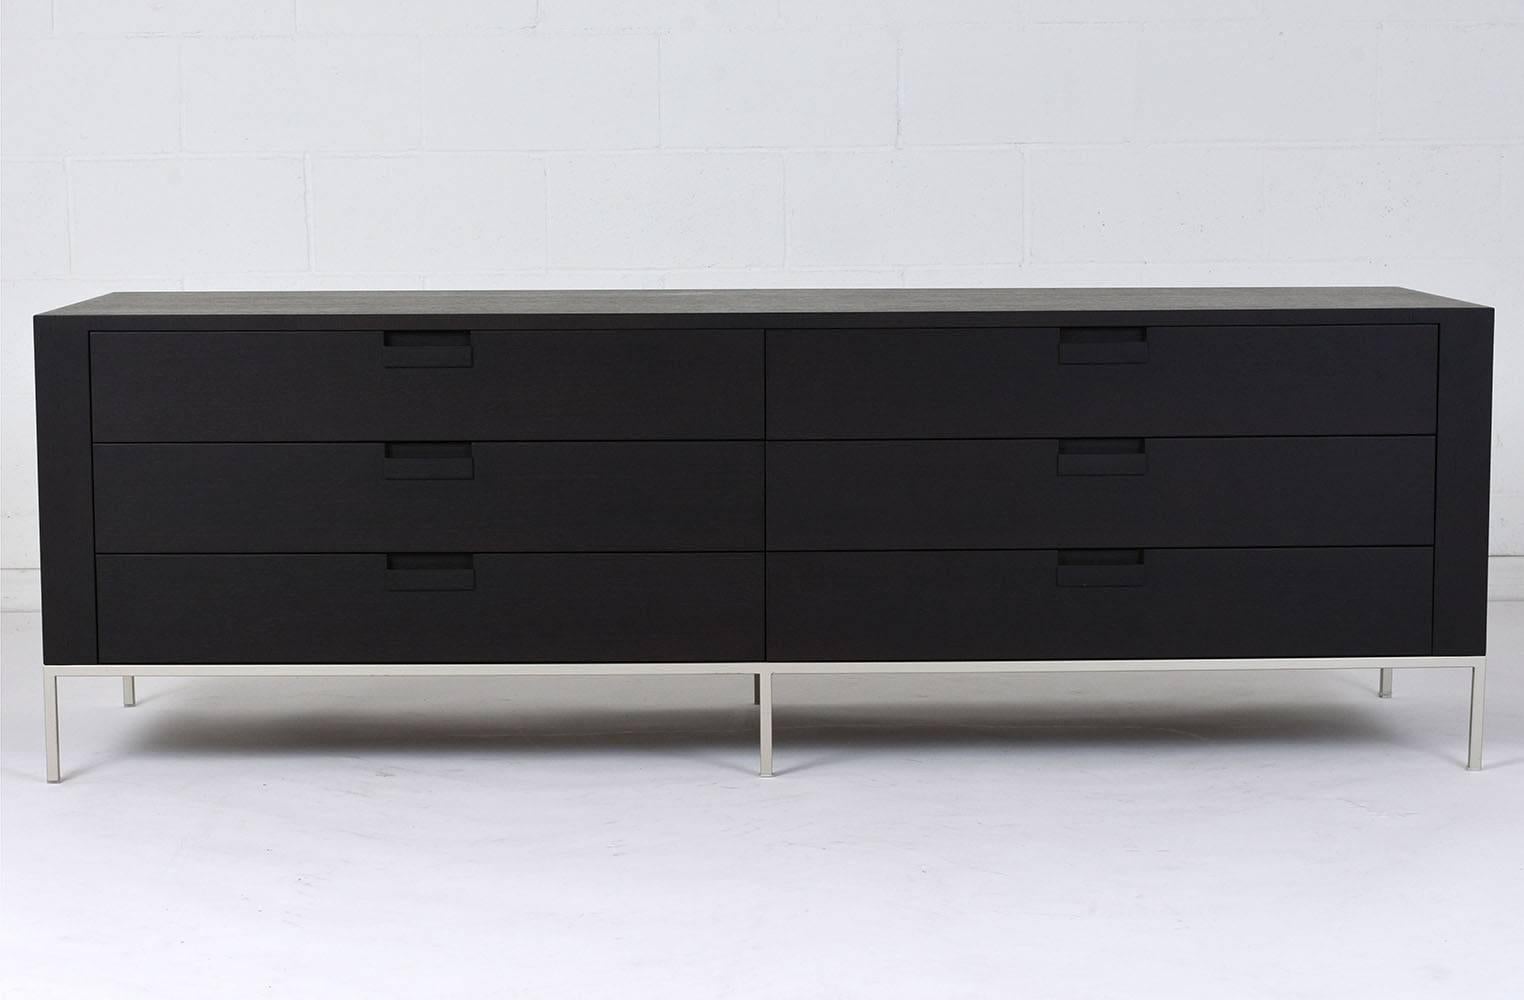 This 1980s Mid-Century Modern style chest of drawers is designed by Antonio Citterio for B&B Italia. The chest is made of teak wood ebonized in a rich black color with a flat finish. The six drawers have carved notches for drawer pulls and ample